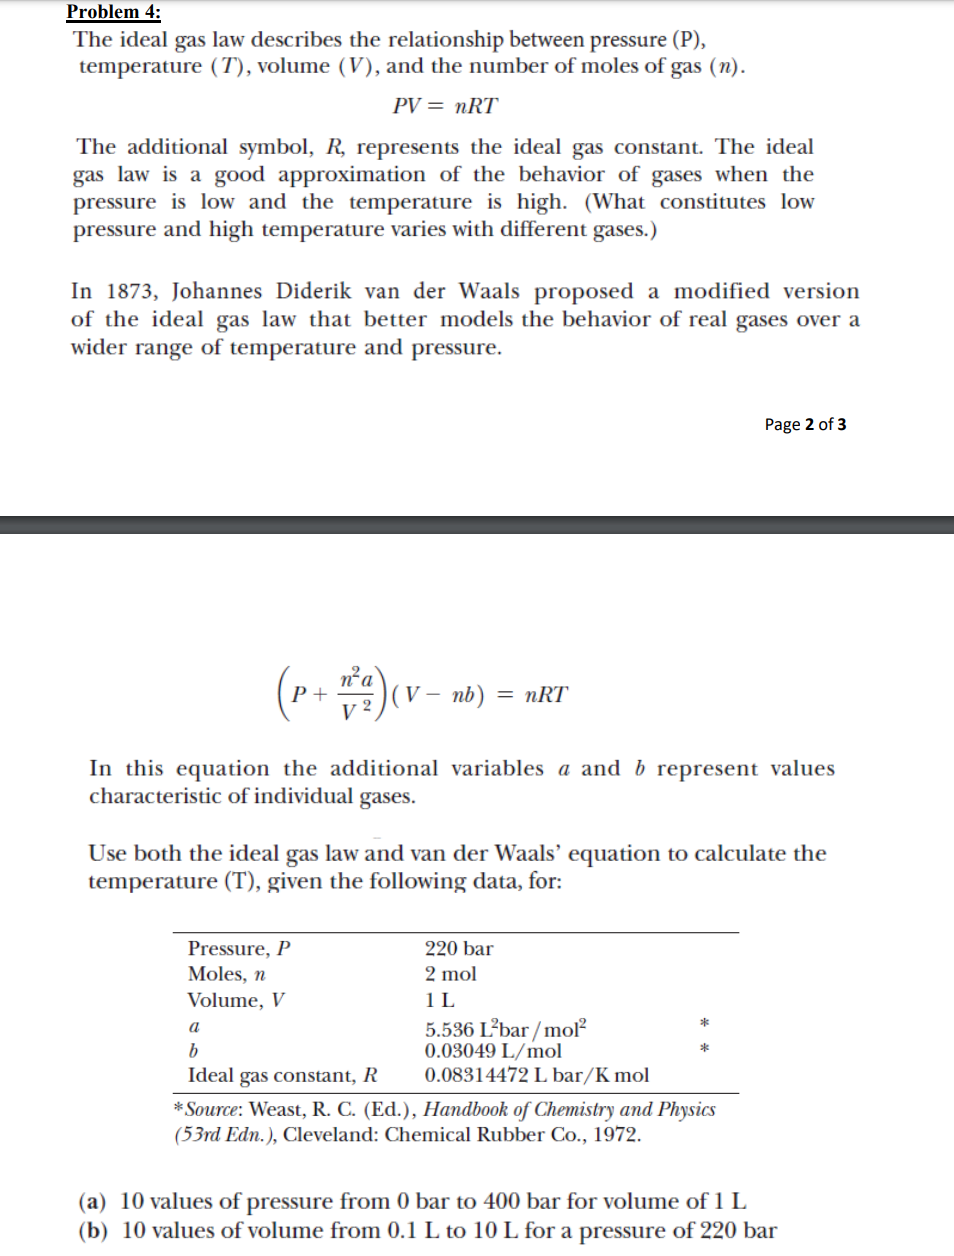 Problem 4: The ideal gas law describes the